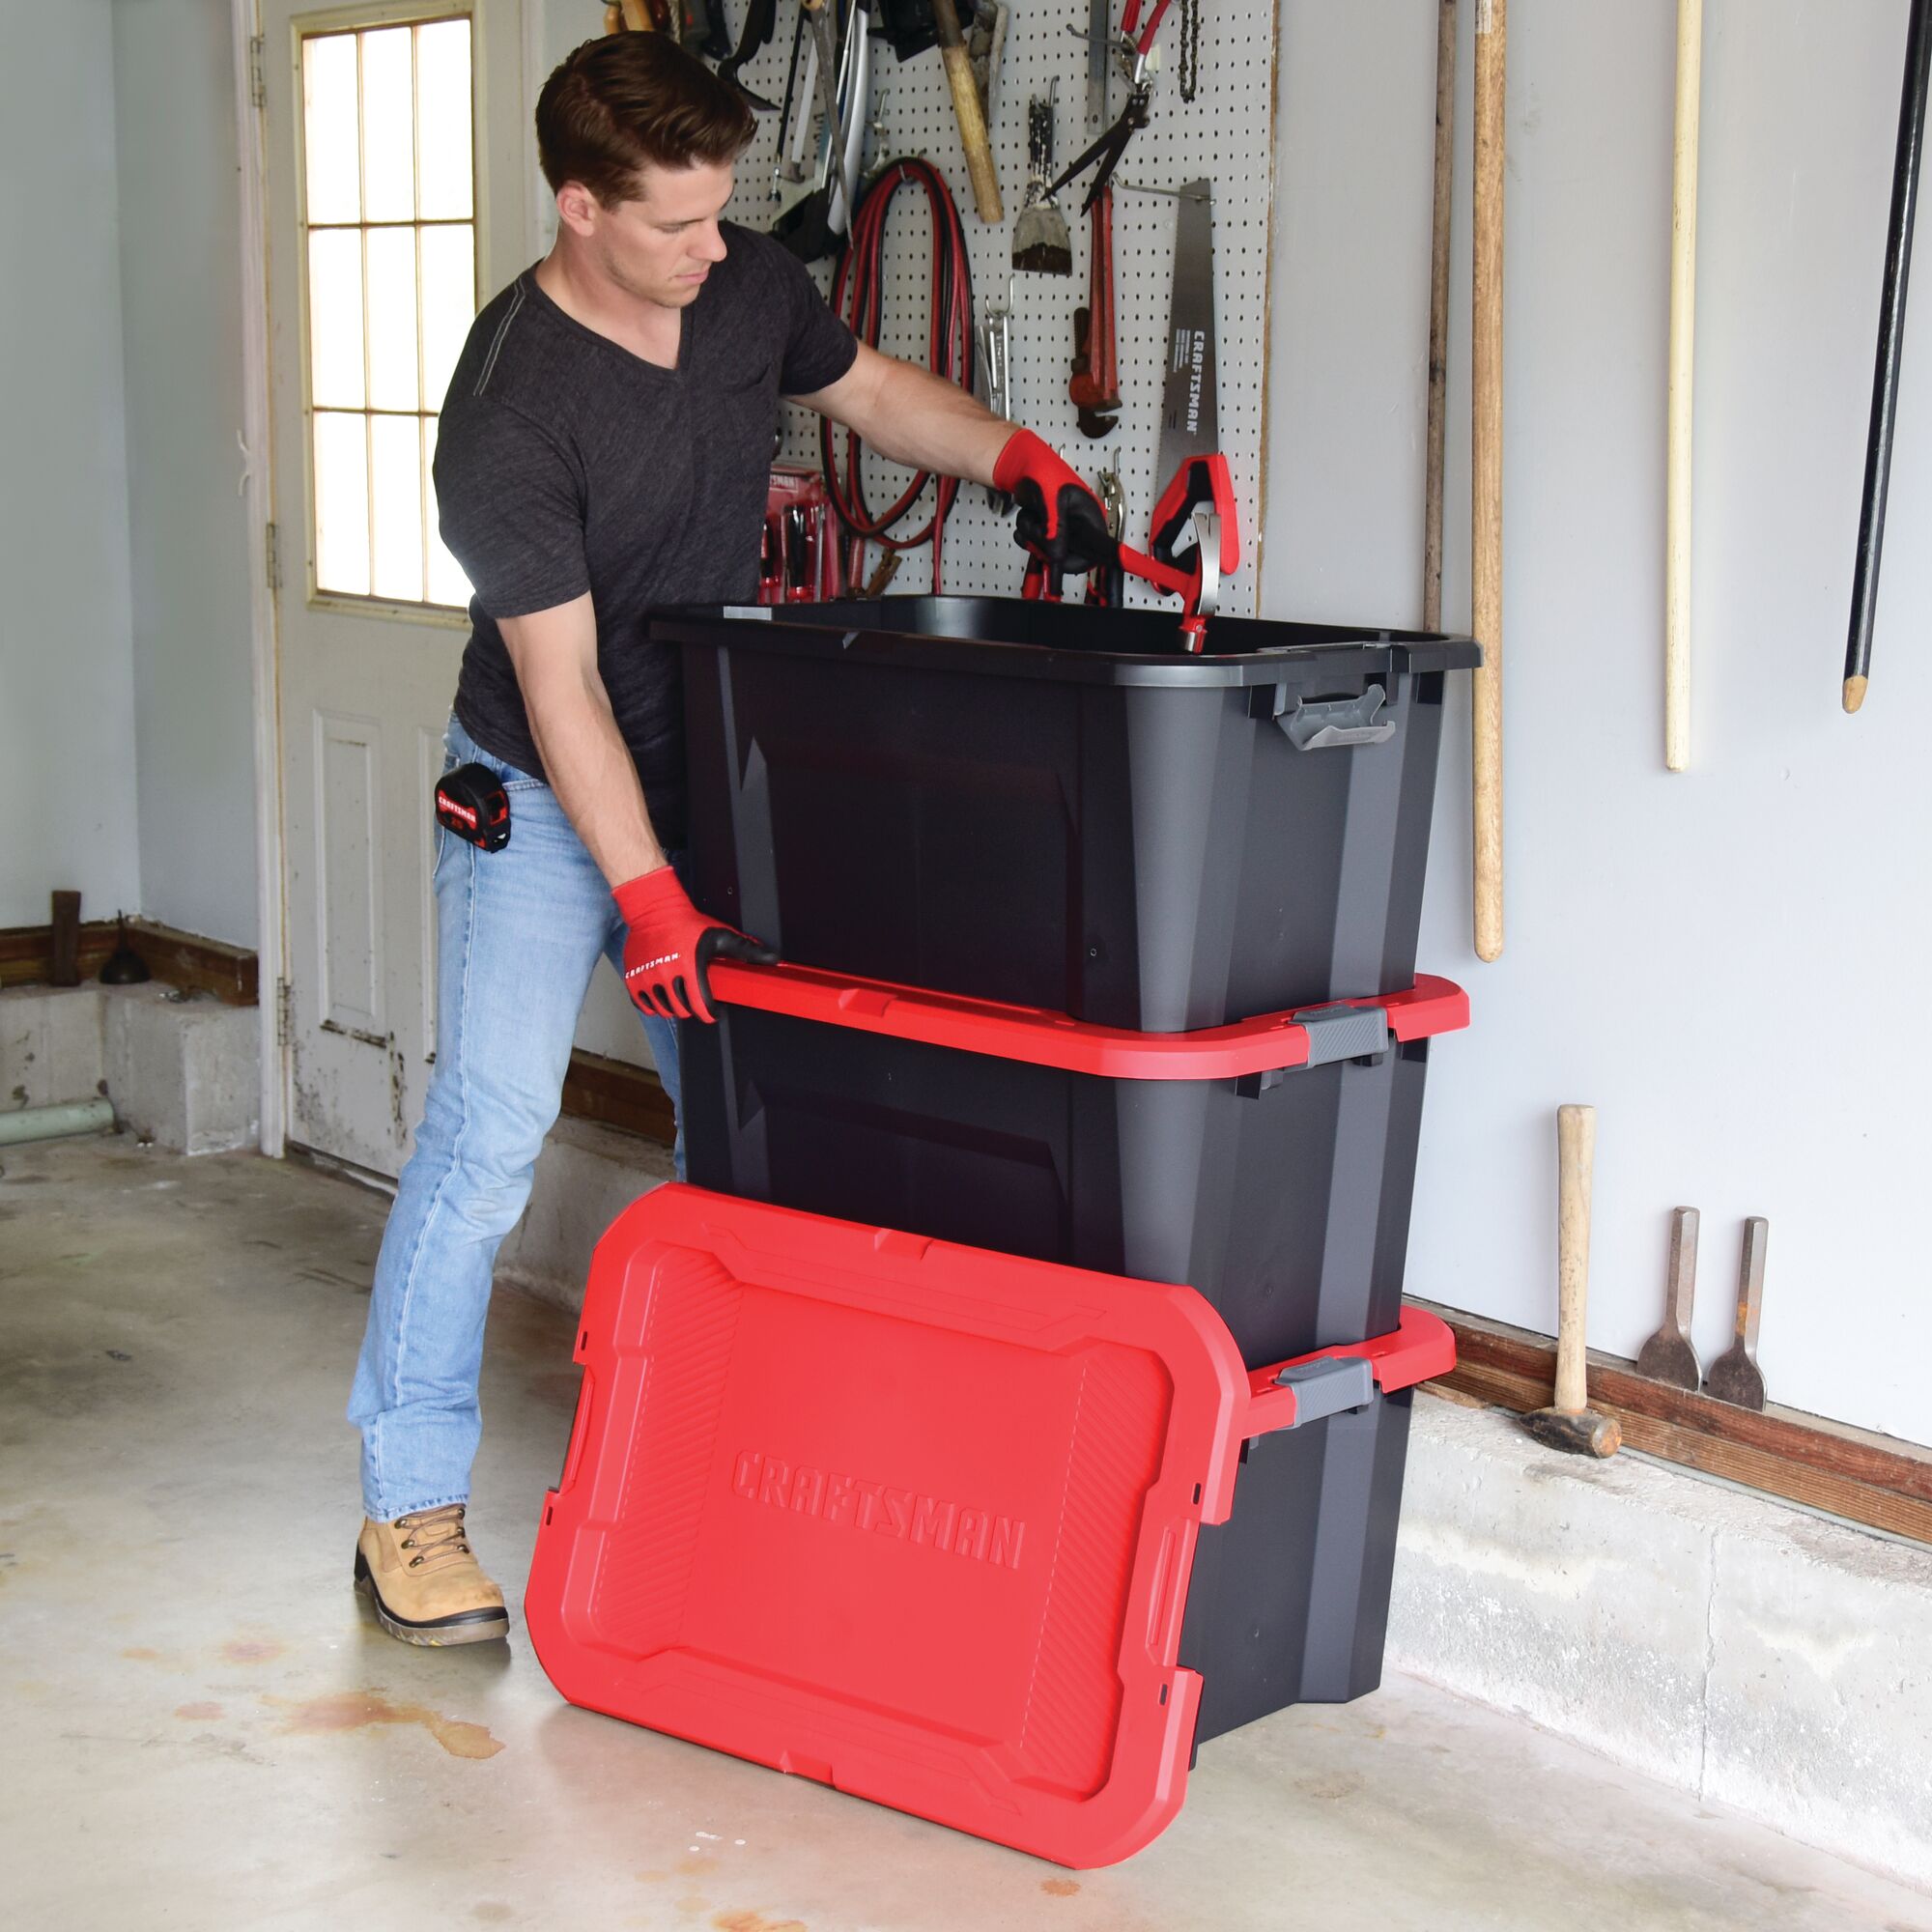 30 Gallon latching tote being used by a person to stack multiple bins.